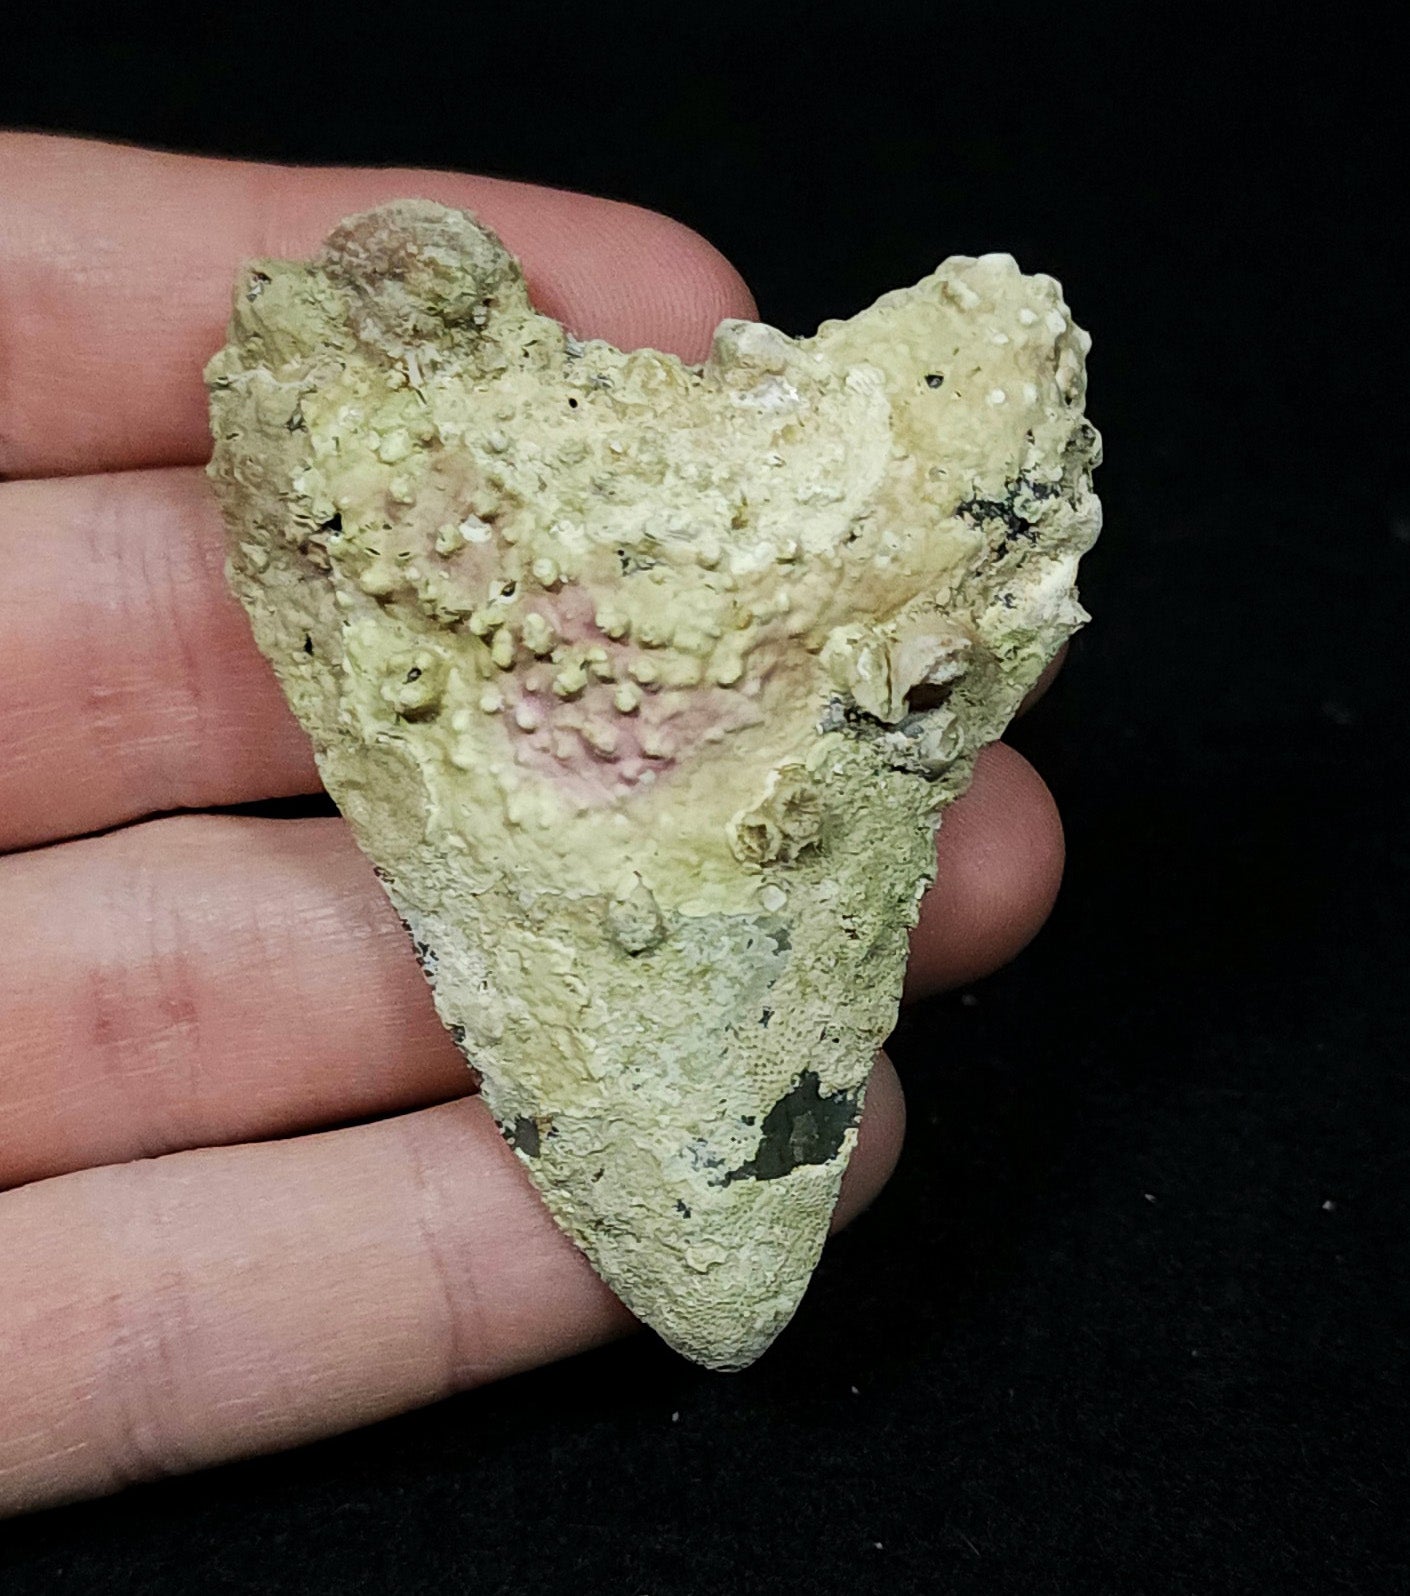 Encrusted 2.54" Fossil Megalodon Tooth - Venice, FL